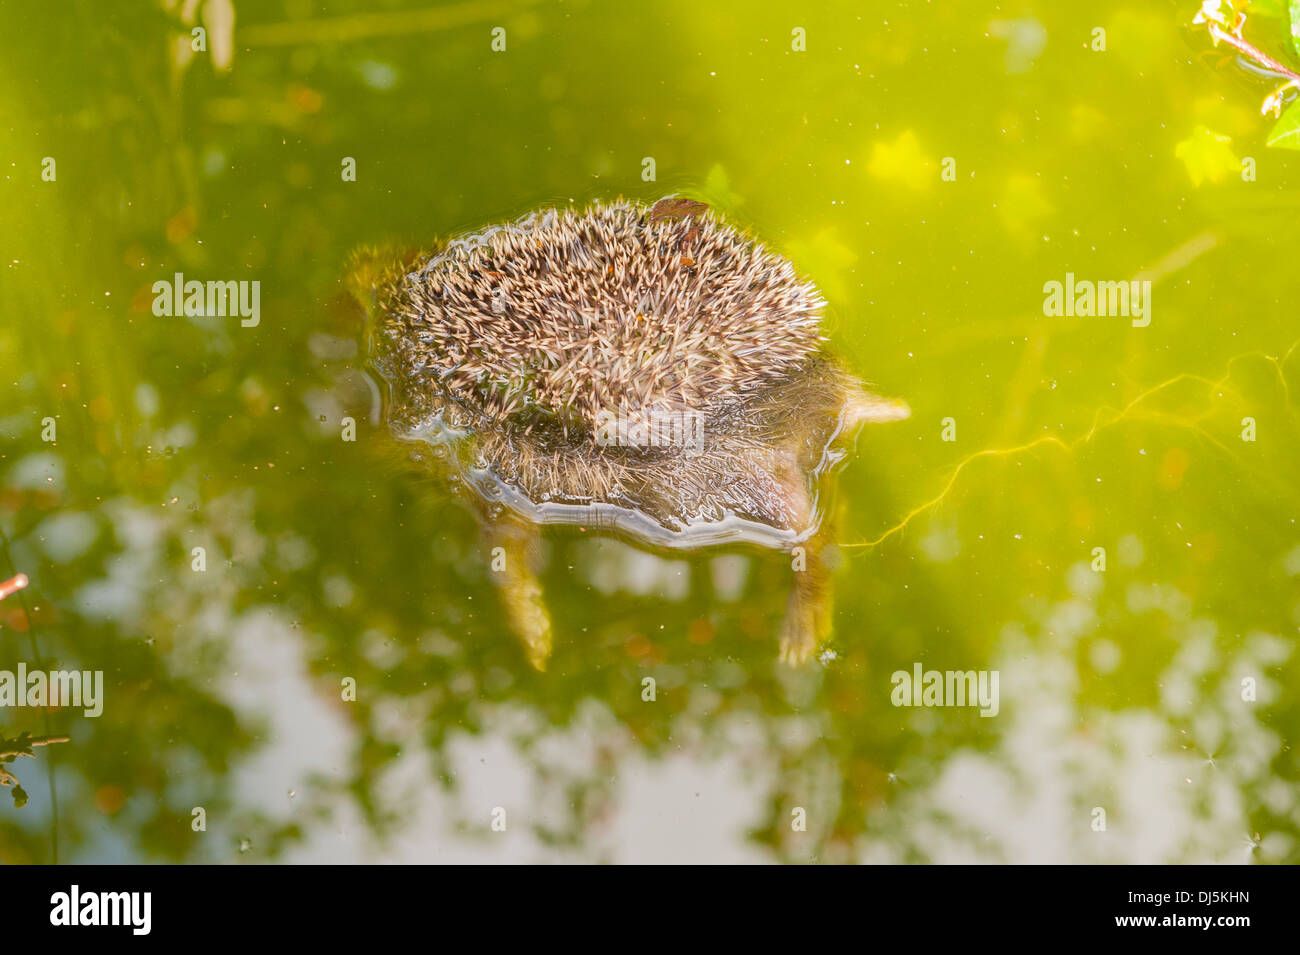 A dead hedgehog floats in a garden pond after having fallen in and drowned in the Uk Stock Photo